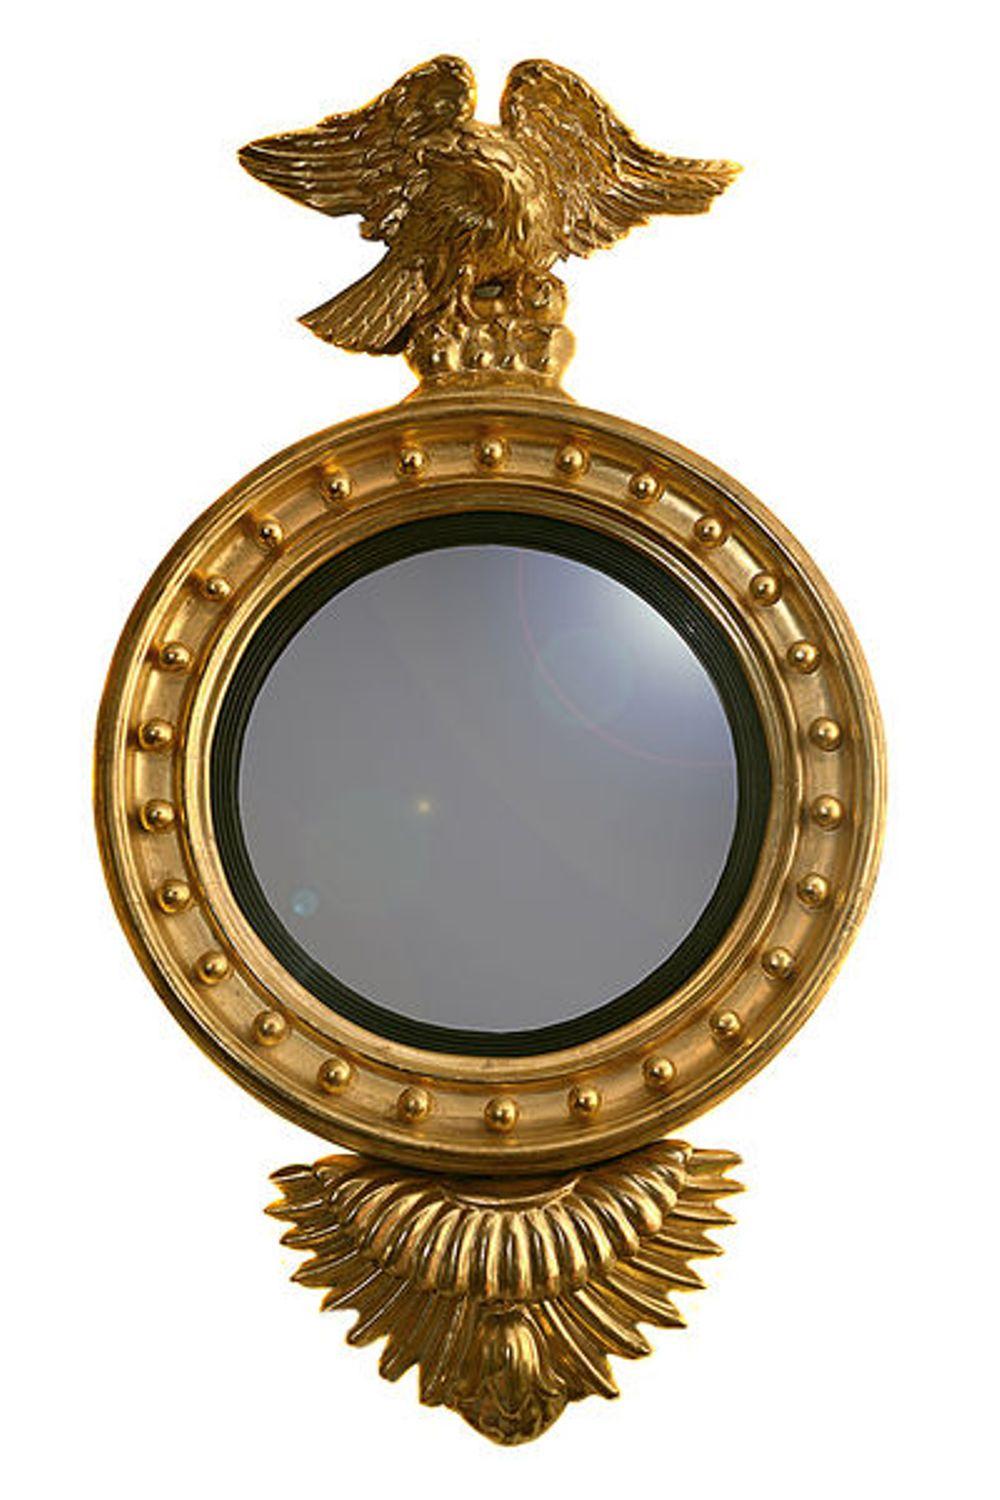 Regency Giltwood and Gesso Convex Wall Hanging Mirror For Sale 1